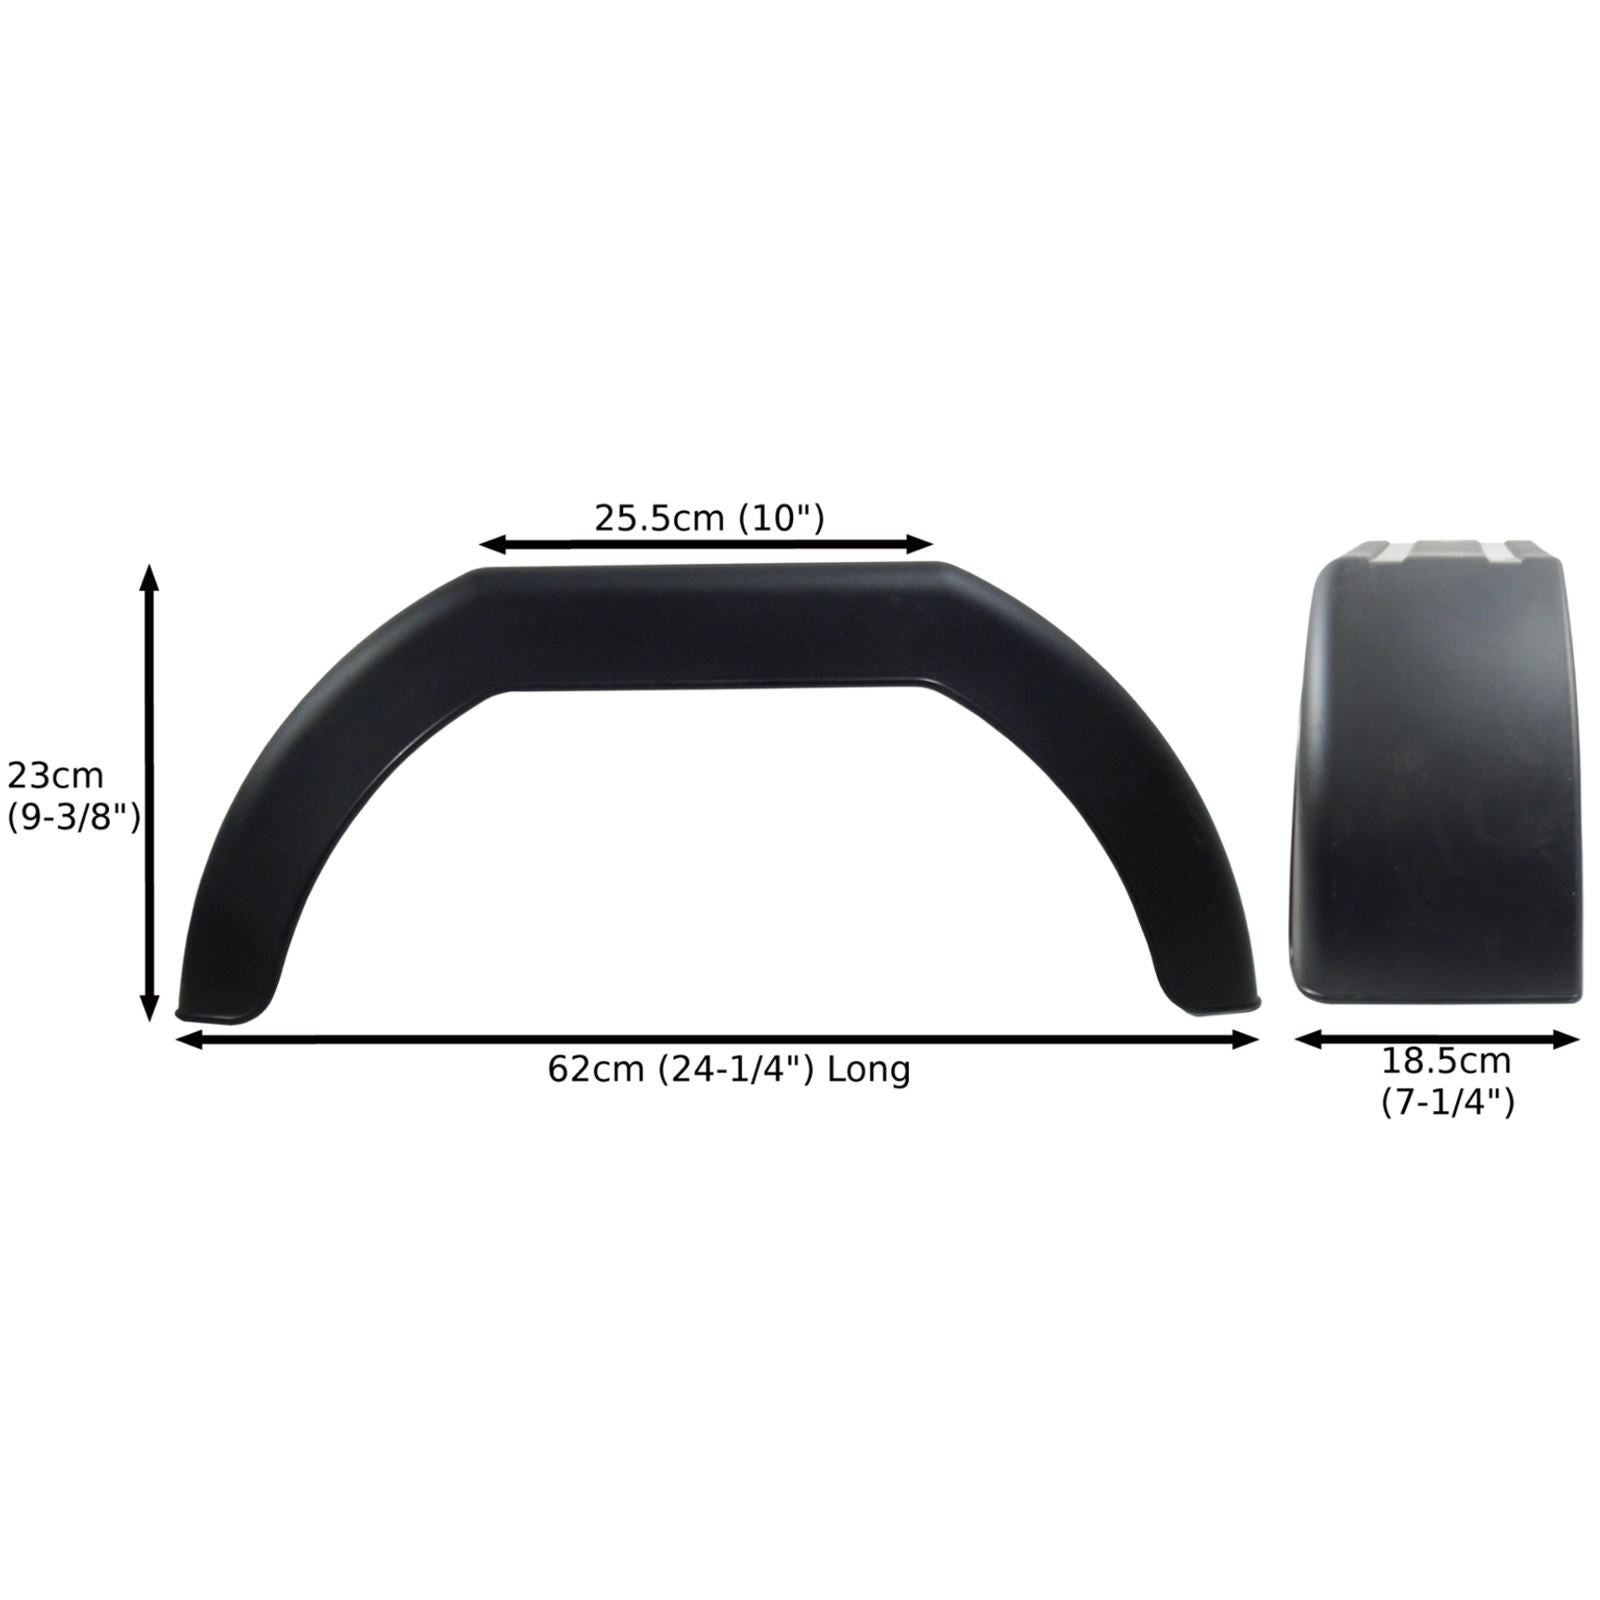 Mudguard for Trailer Wheels 8" Plastic Single / Wing / Fender Injection Moulded